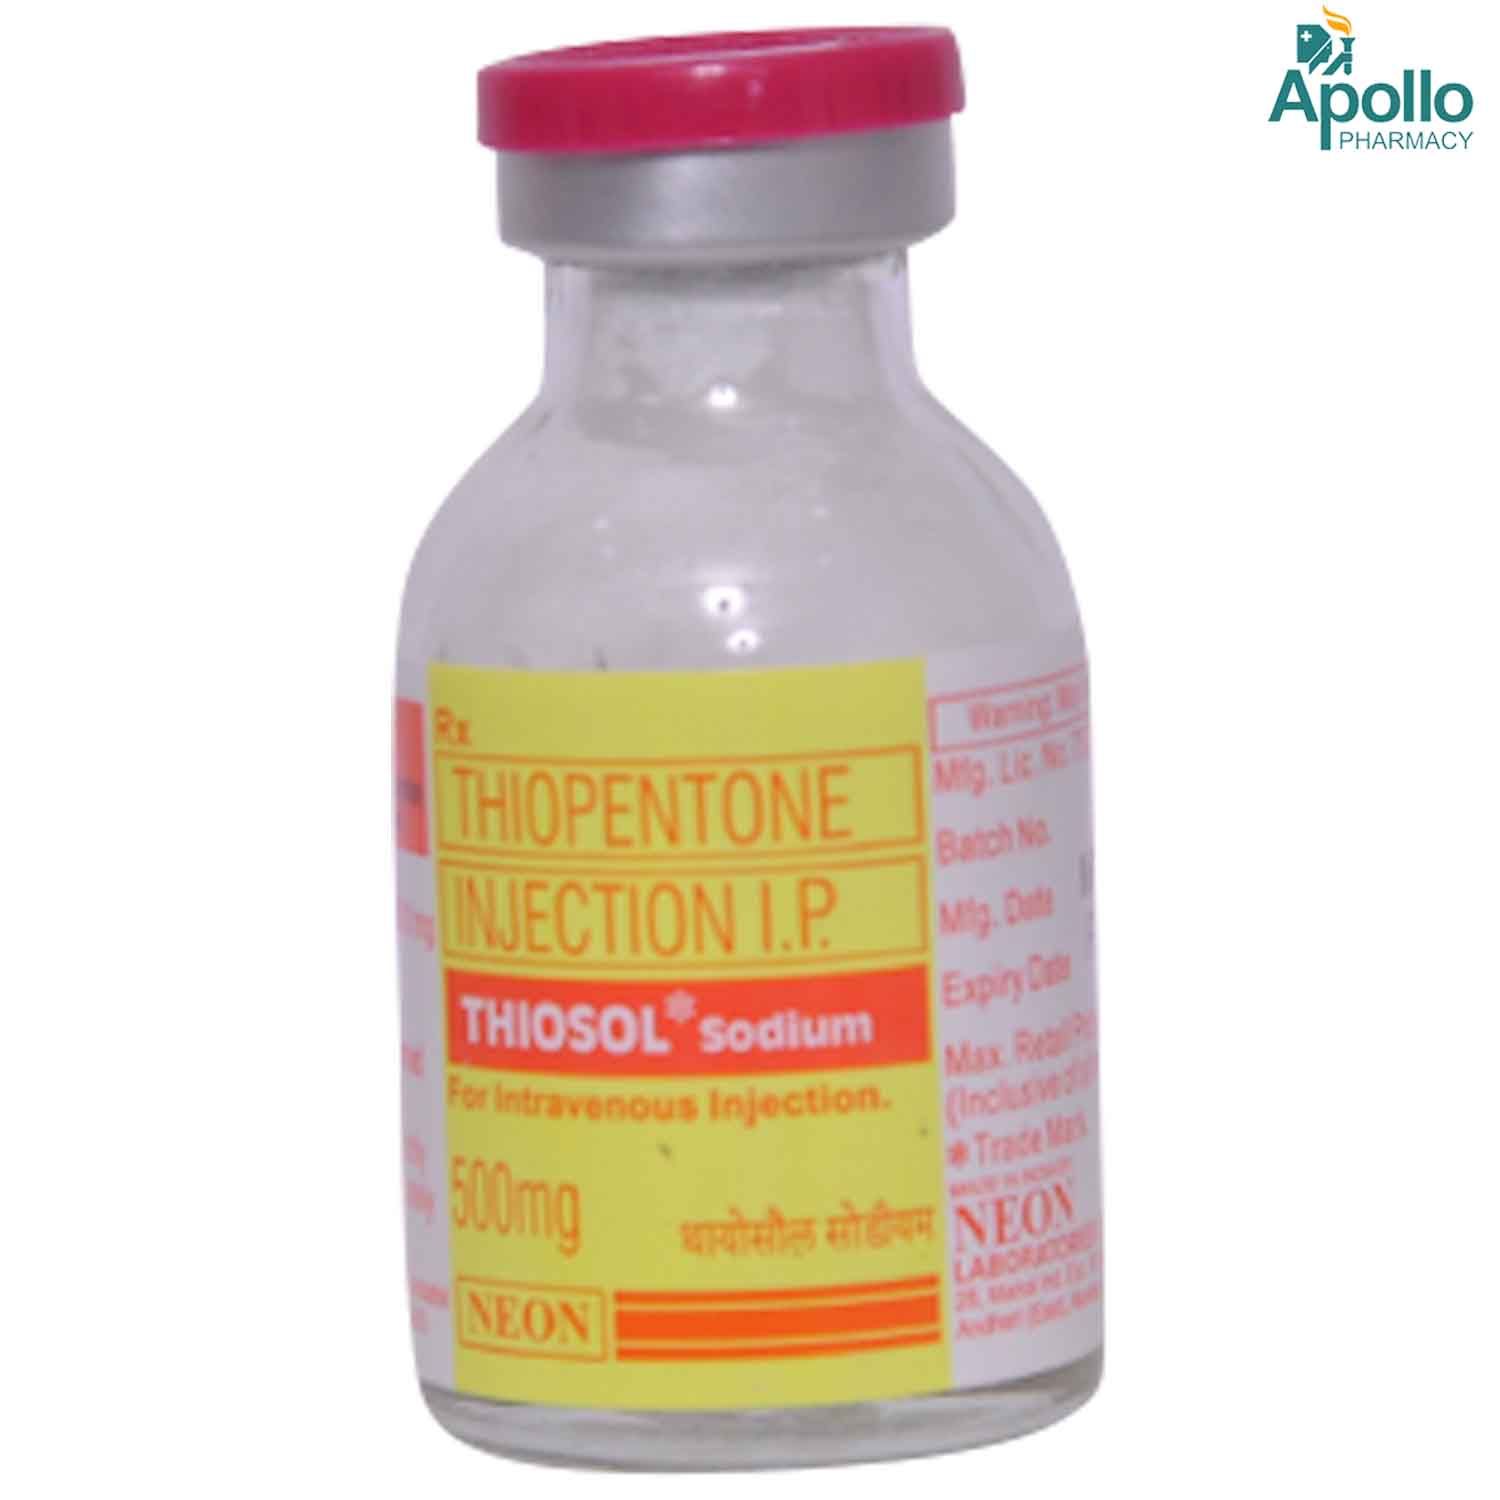 Buy Thiosol Sodium 500mg Injection Online